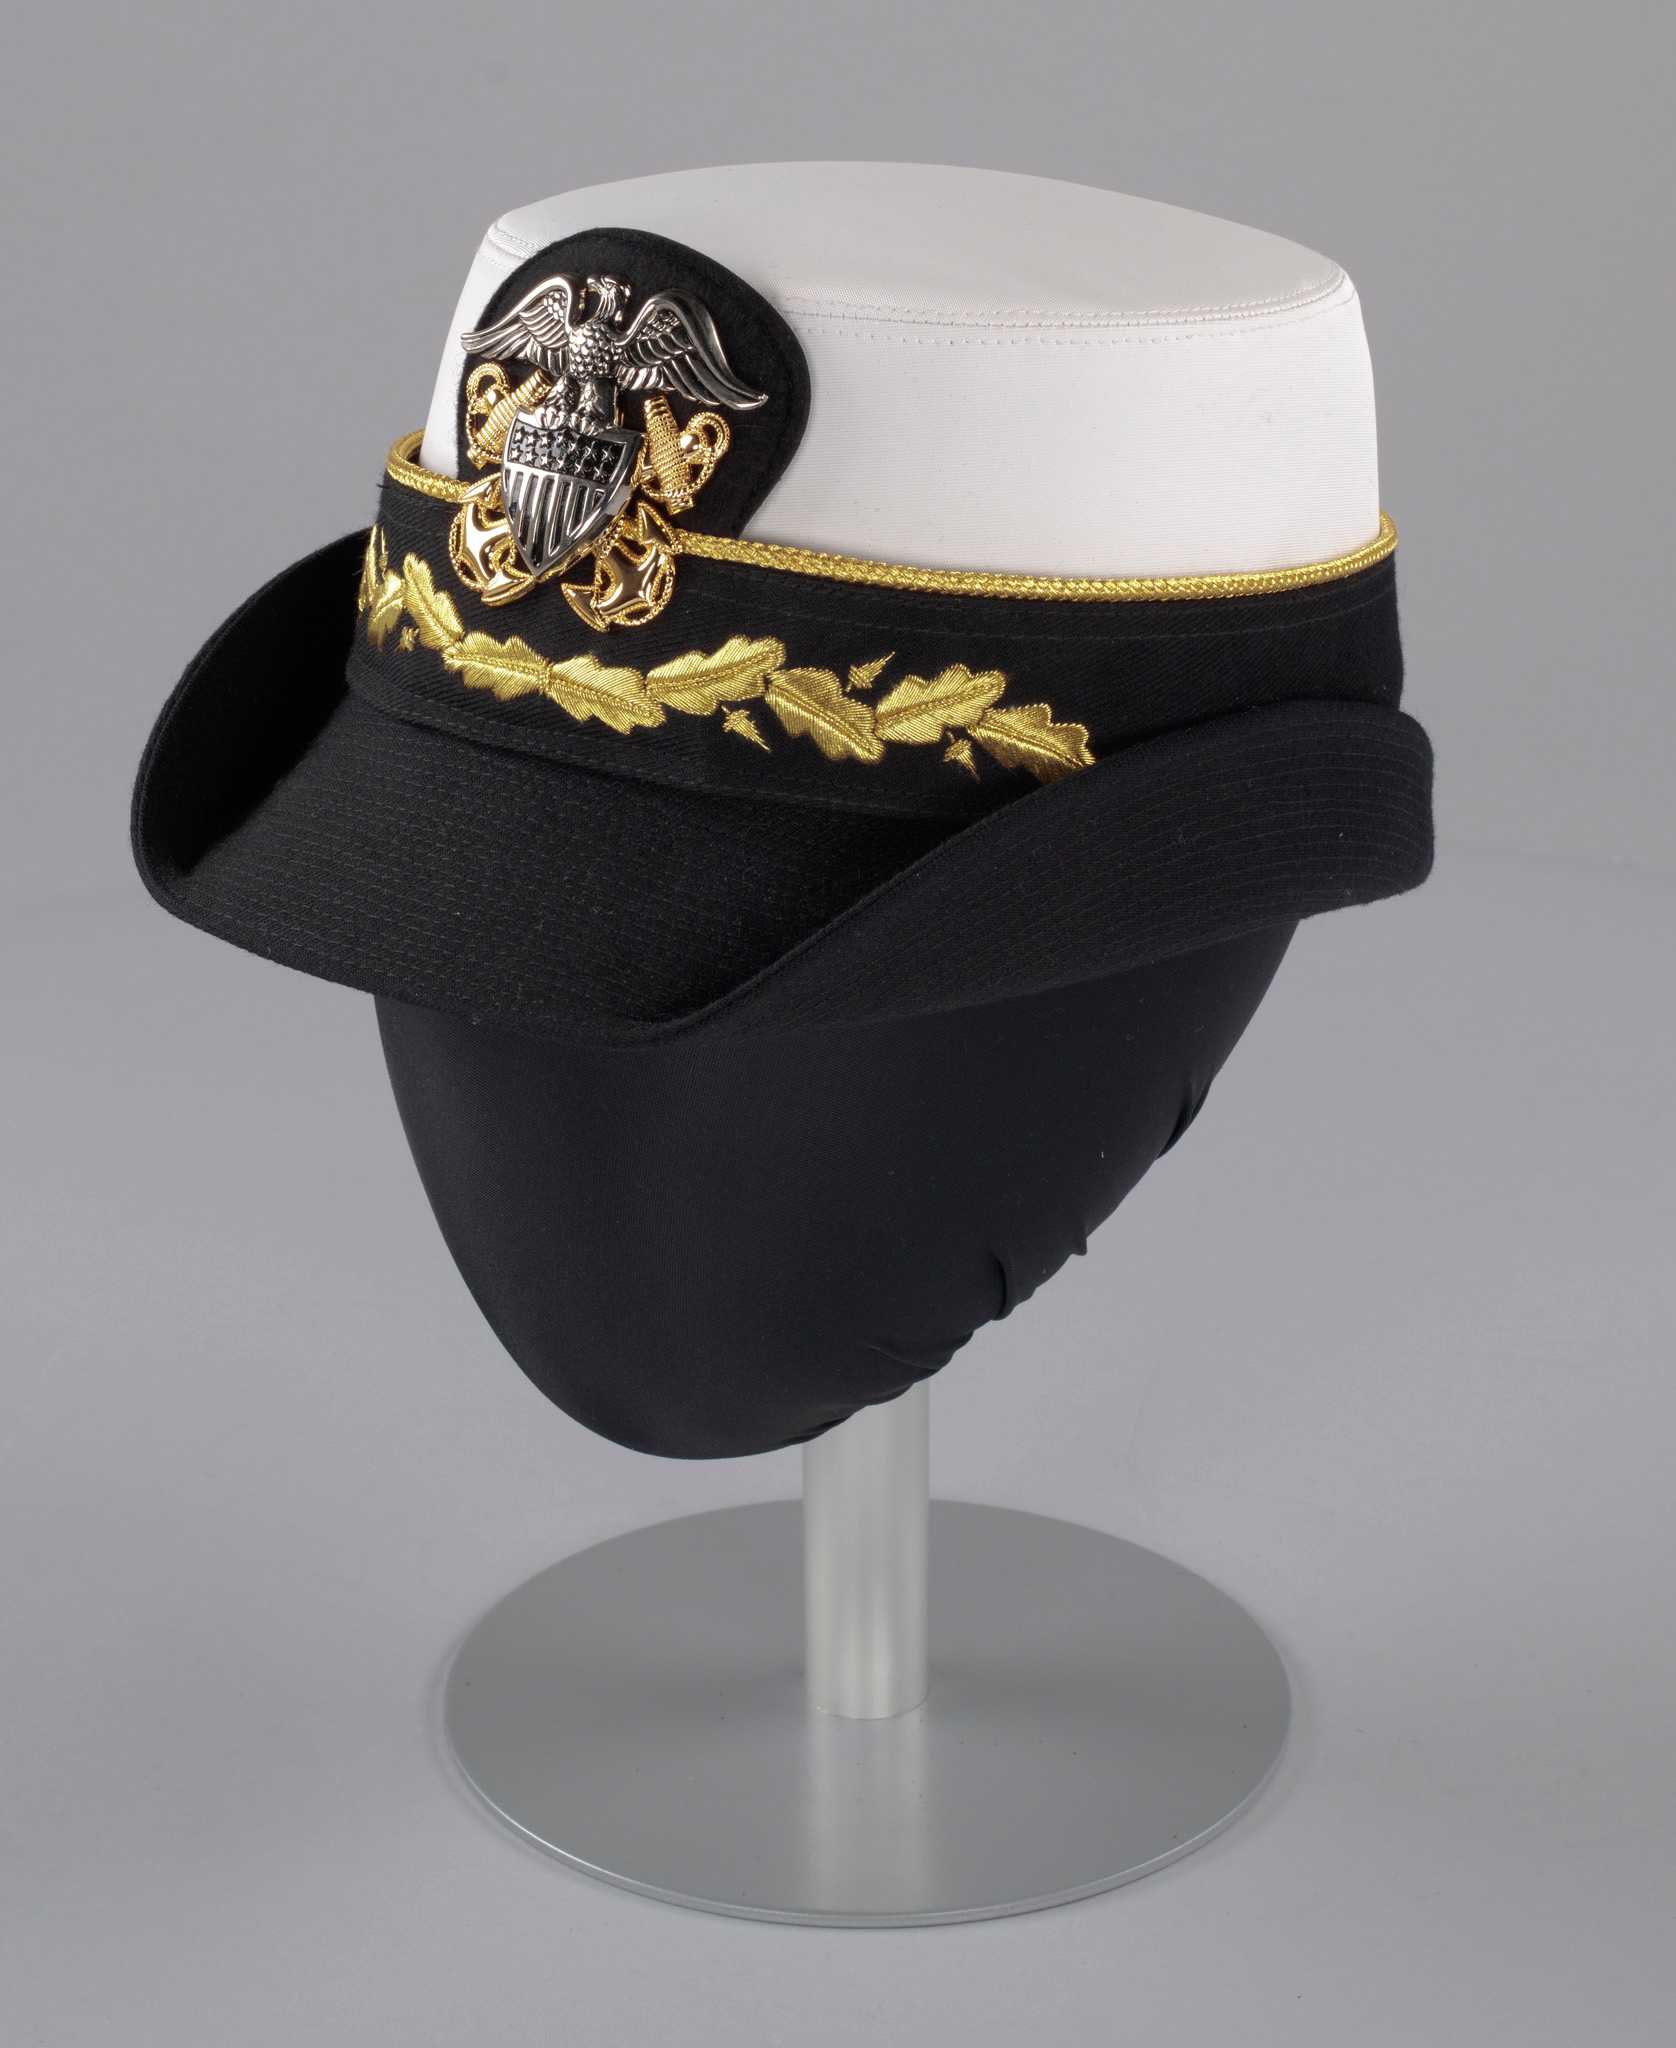 A US Navy dress uniform hat (a) worn by Admiral Michelle Howard as commander with a white waterproof fabric crown and a black canvas brim, with a hat band (b) featuring a US Navy insignia pin (c). The brim of the hat is stiffened, with both sides fixed in a turned up position. The interior of the hat is lined with black waterproof plastic with the manufacturer's name "Kingform Cap / De Luxe / NEW YORK" stamped on it in gold. The sides of the crown are lined in black synthetic satin fabric. There is a size "23" tag at the interior center back and a tag at the interior proper left back with style and military regulation information. 

The hat band (b) attaches to the hat (a) with four (4) metal snaps, one at the front and back and one on each side. The band is made from black canvas trimmed on the top edge with gold braid. A length of the black canvas cut on the bias is looped around the center back portion of the band and stitched to it at the bottom edge, with the tails left dangling below the brim of the hat (a). An oak leaf and acorn design is embroidered in metallic gold thread at the center front of the band. A piece of black felt backed in leather with rounded edges protrudes from the center front top edge of the band.

A large silver and gold metal US Navy insignia pin (c) with two screw back fasteners is attached to the black felt on the hat band (b). The eagle and shield are in silver, while the two crossed anchors are in gold.